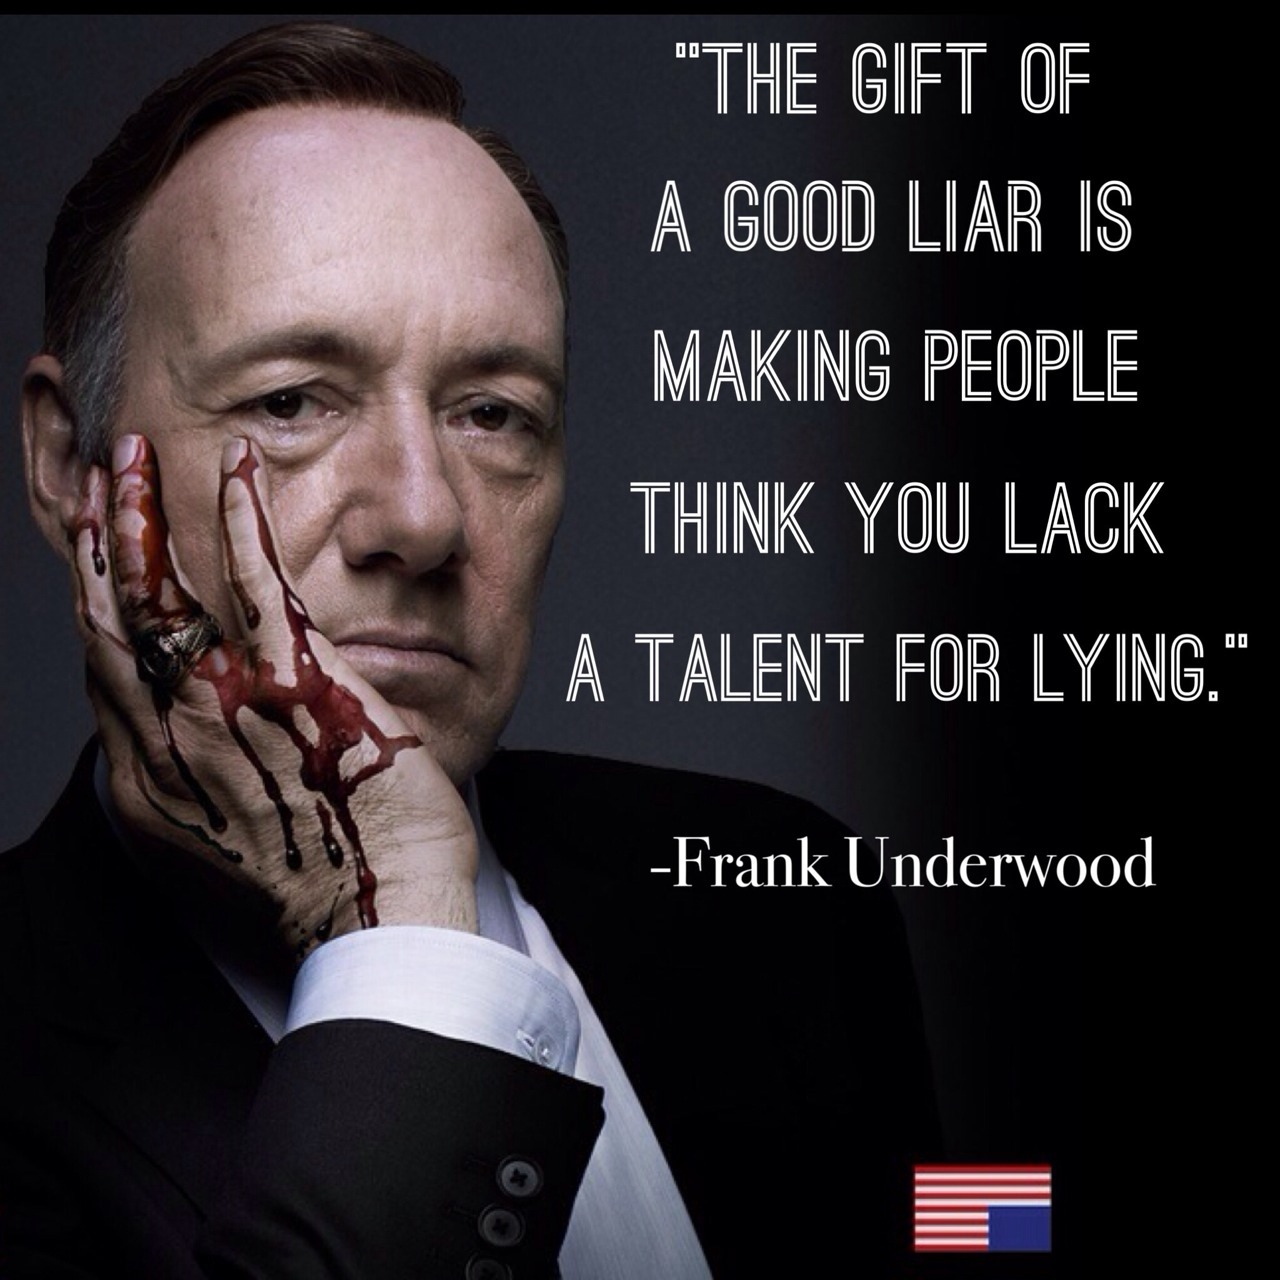 House Of Cards Liar Quote - HD Wallpaper 